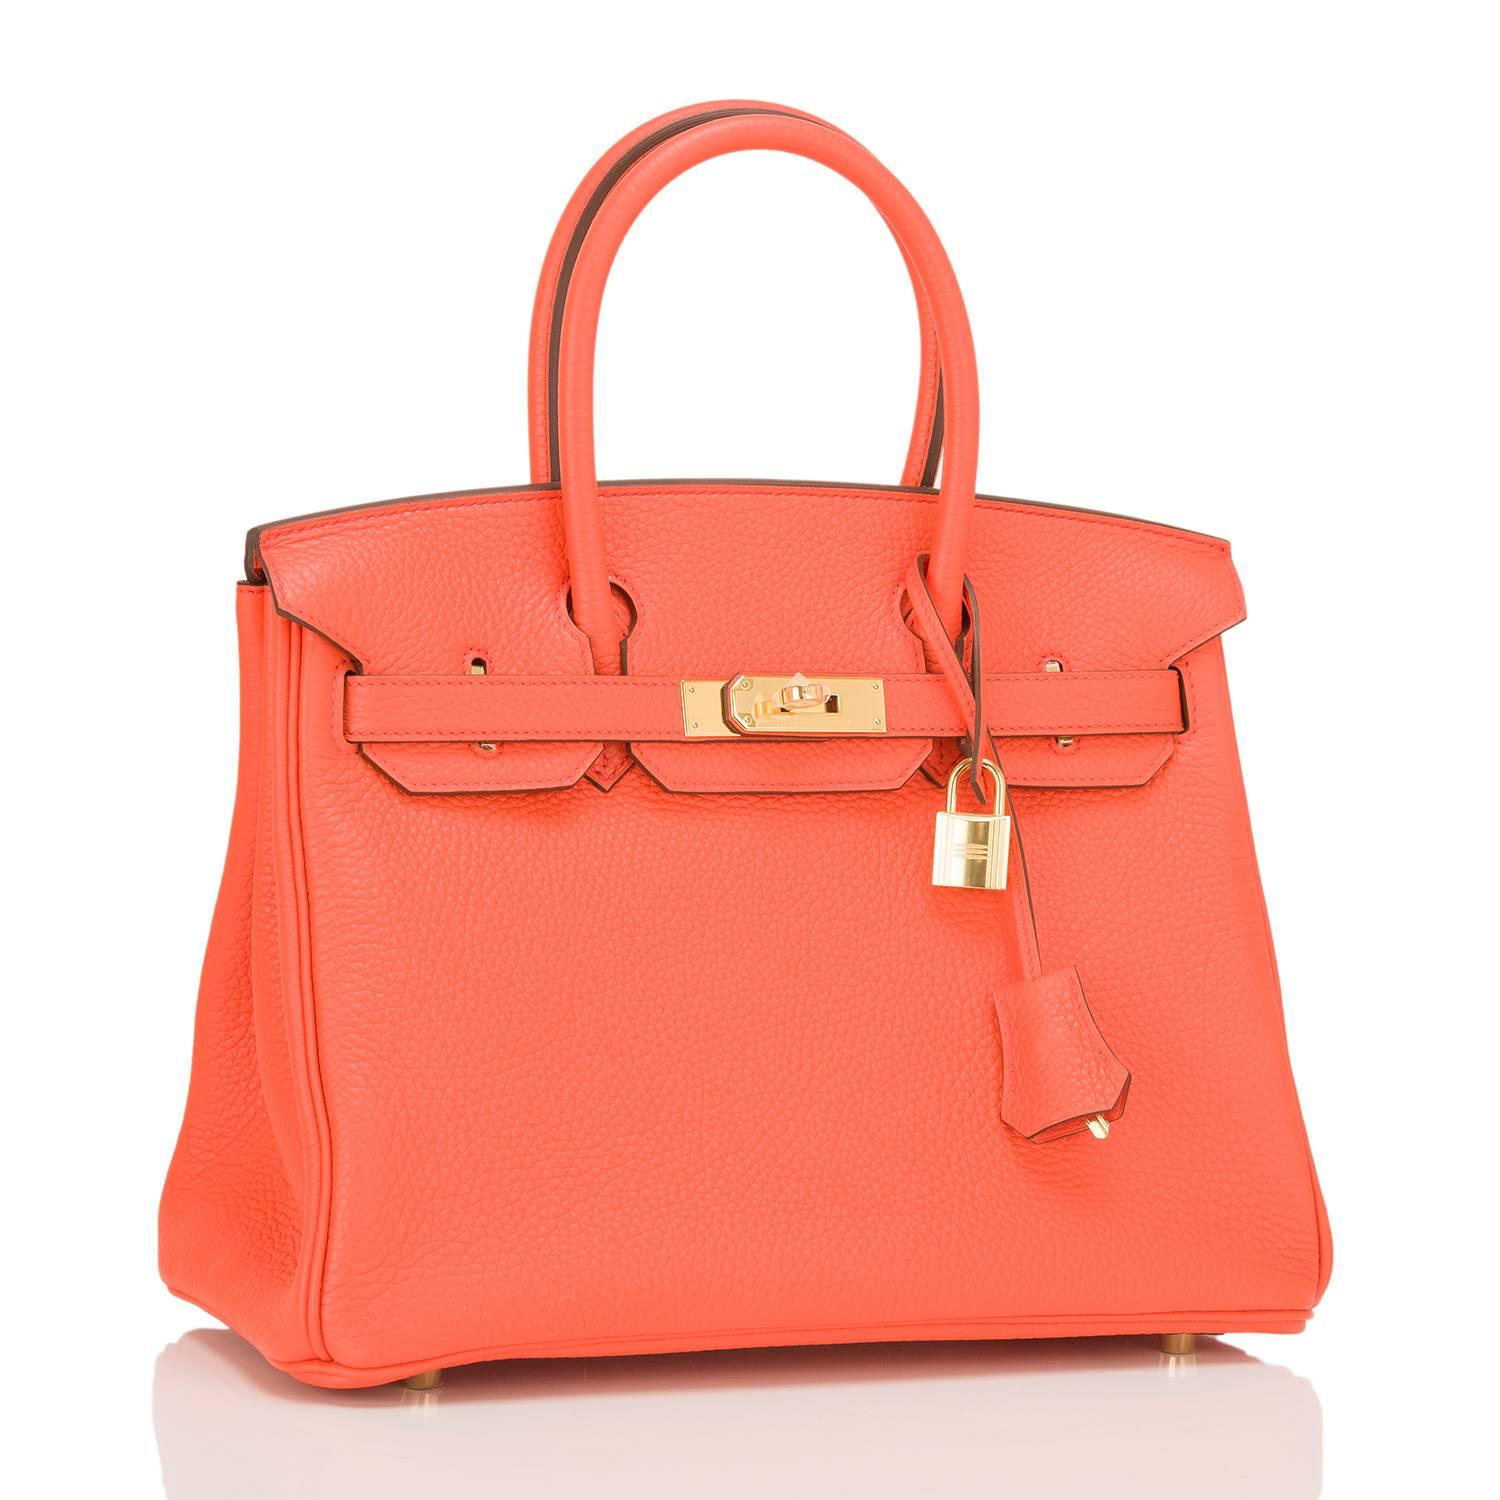 Hermes Orange Poppy 30cm in clemence leather with gold hardware.

This Birkin features tonal stitching, front toggle closure, clochette with lock and two keys, and double rolled handles. The interior is lined in Orange Poppy chevre with one zip